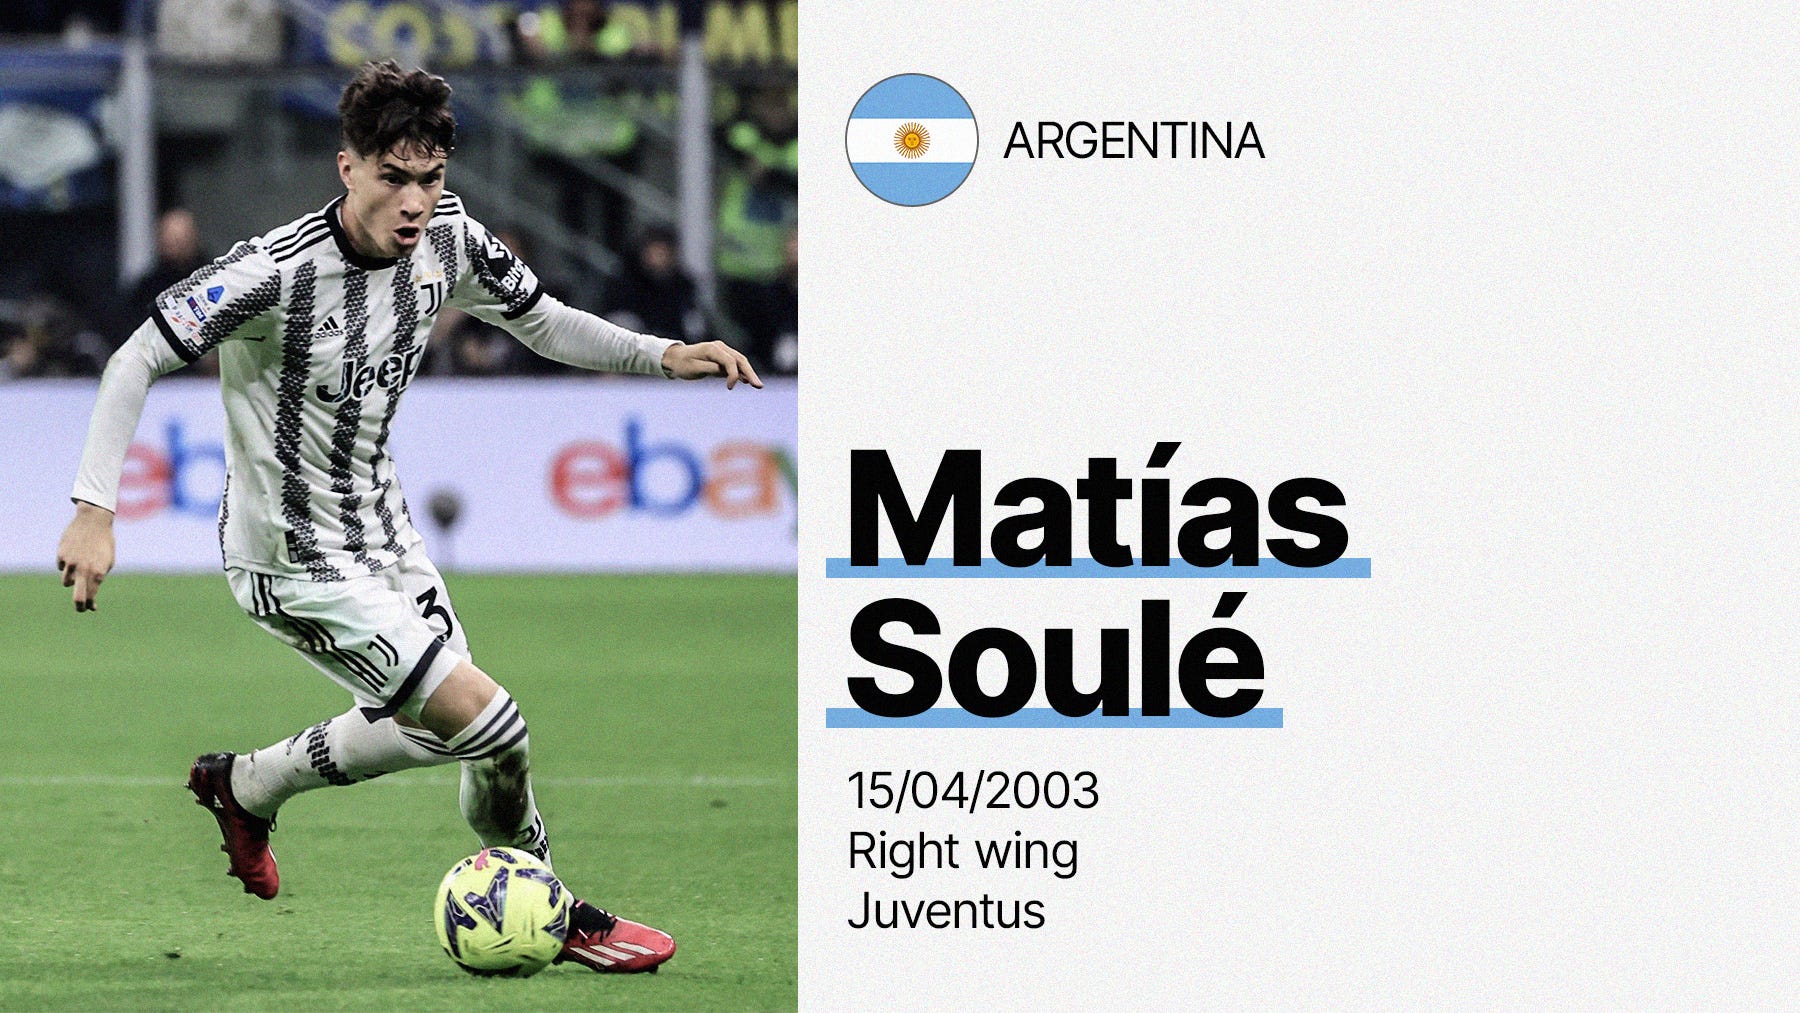 A photo of Matías Soulé dribbling with the ball for Juventus with a brief information panel about him, including Japan flag, date of birth, position and club.